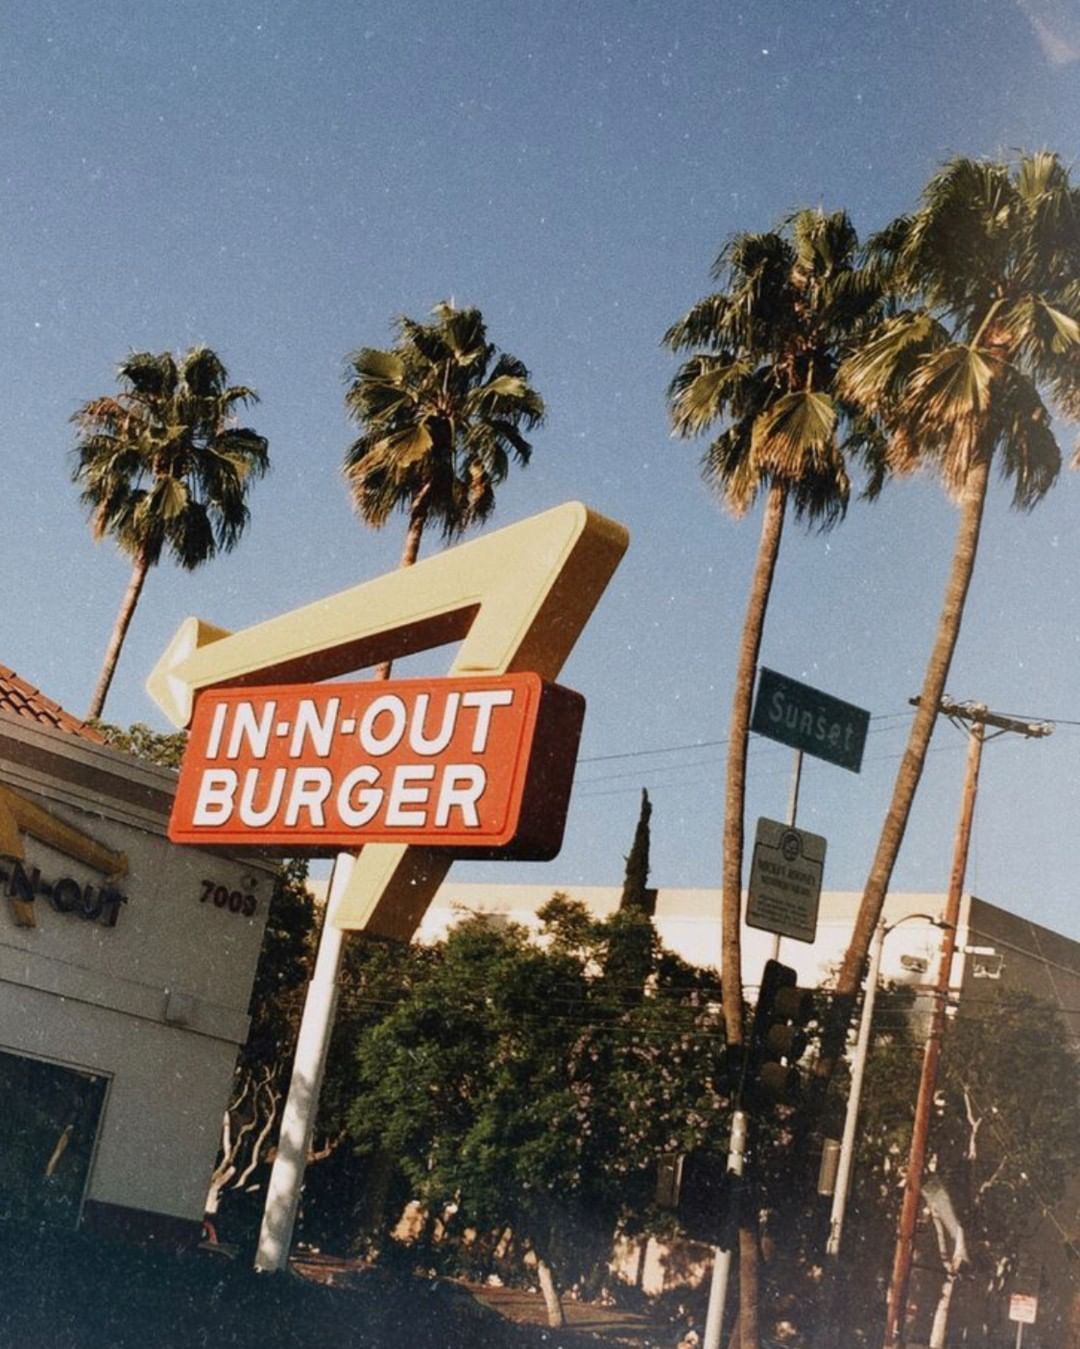 A sign for in-n -out burger with palm trees - Los Angeles